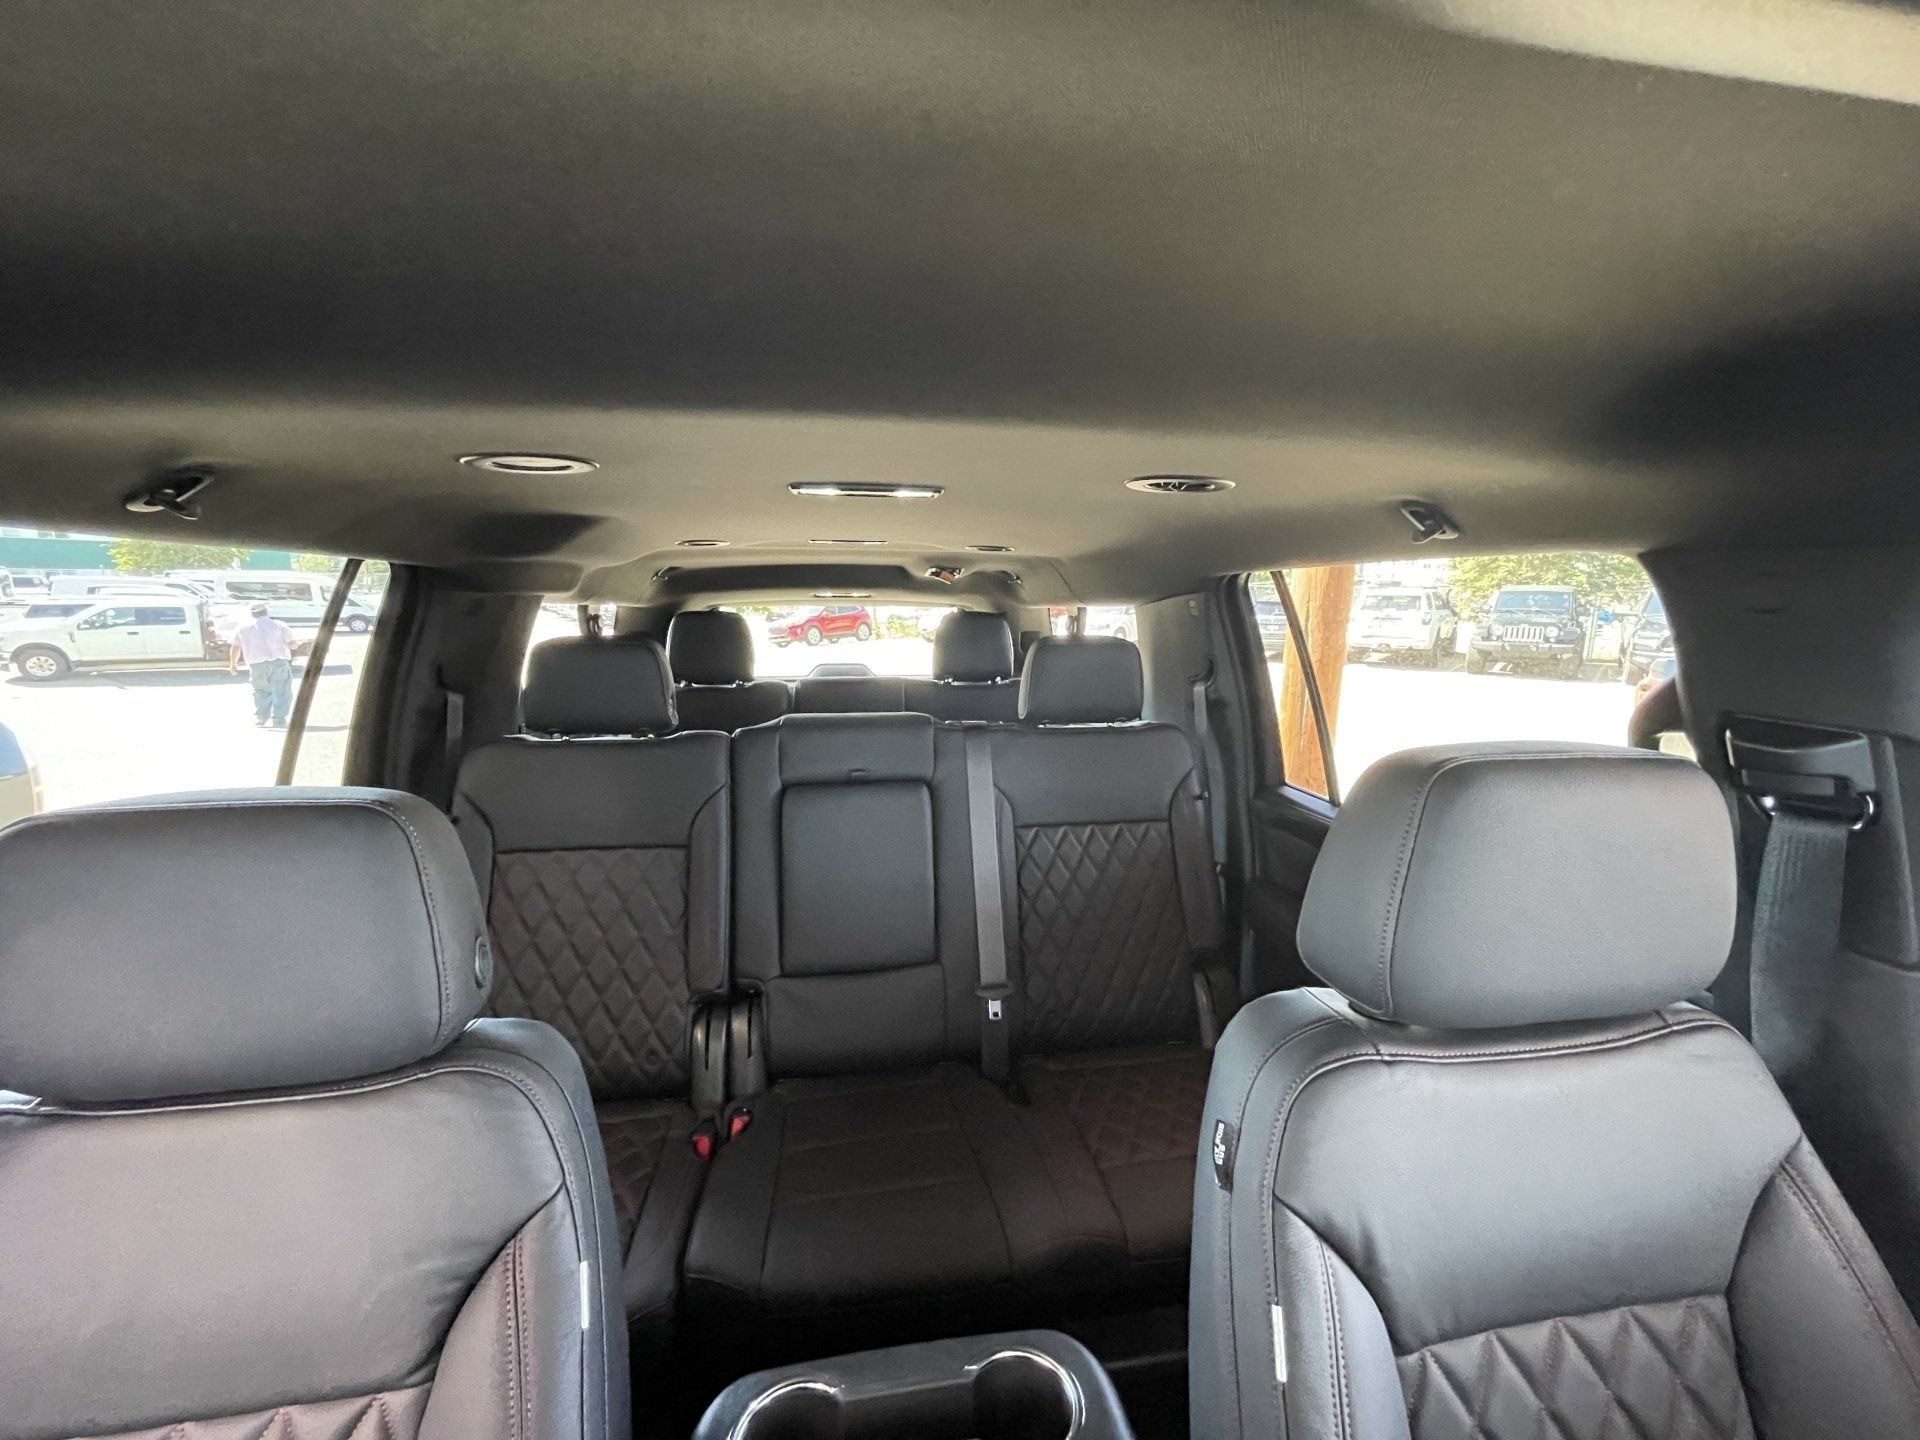 Limo To Go Luxury full size SUV interior plush leather seating